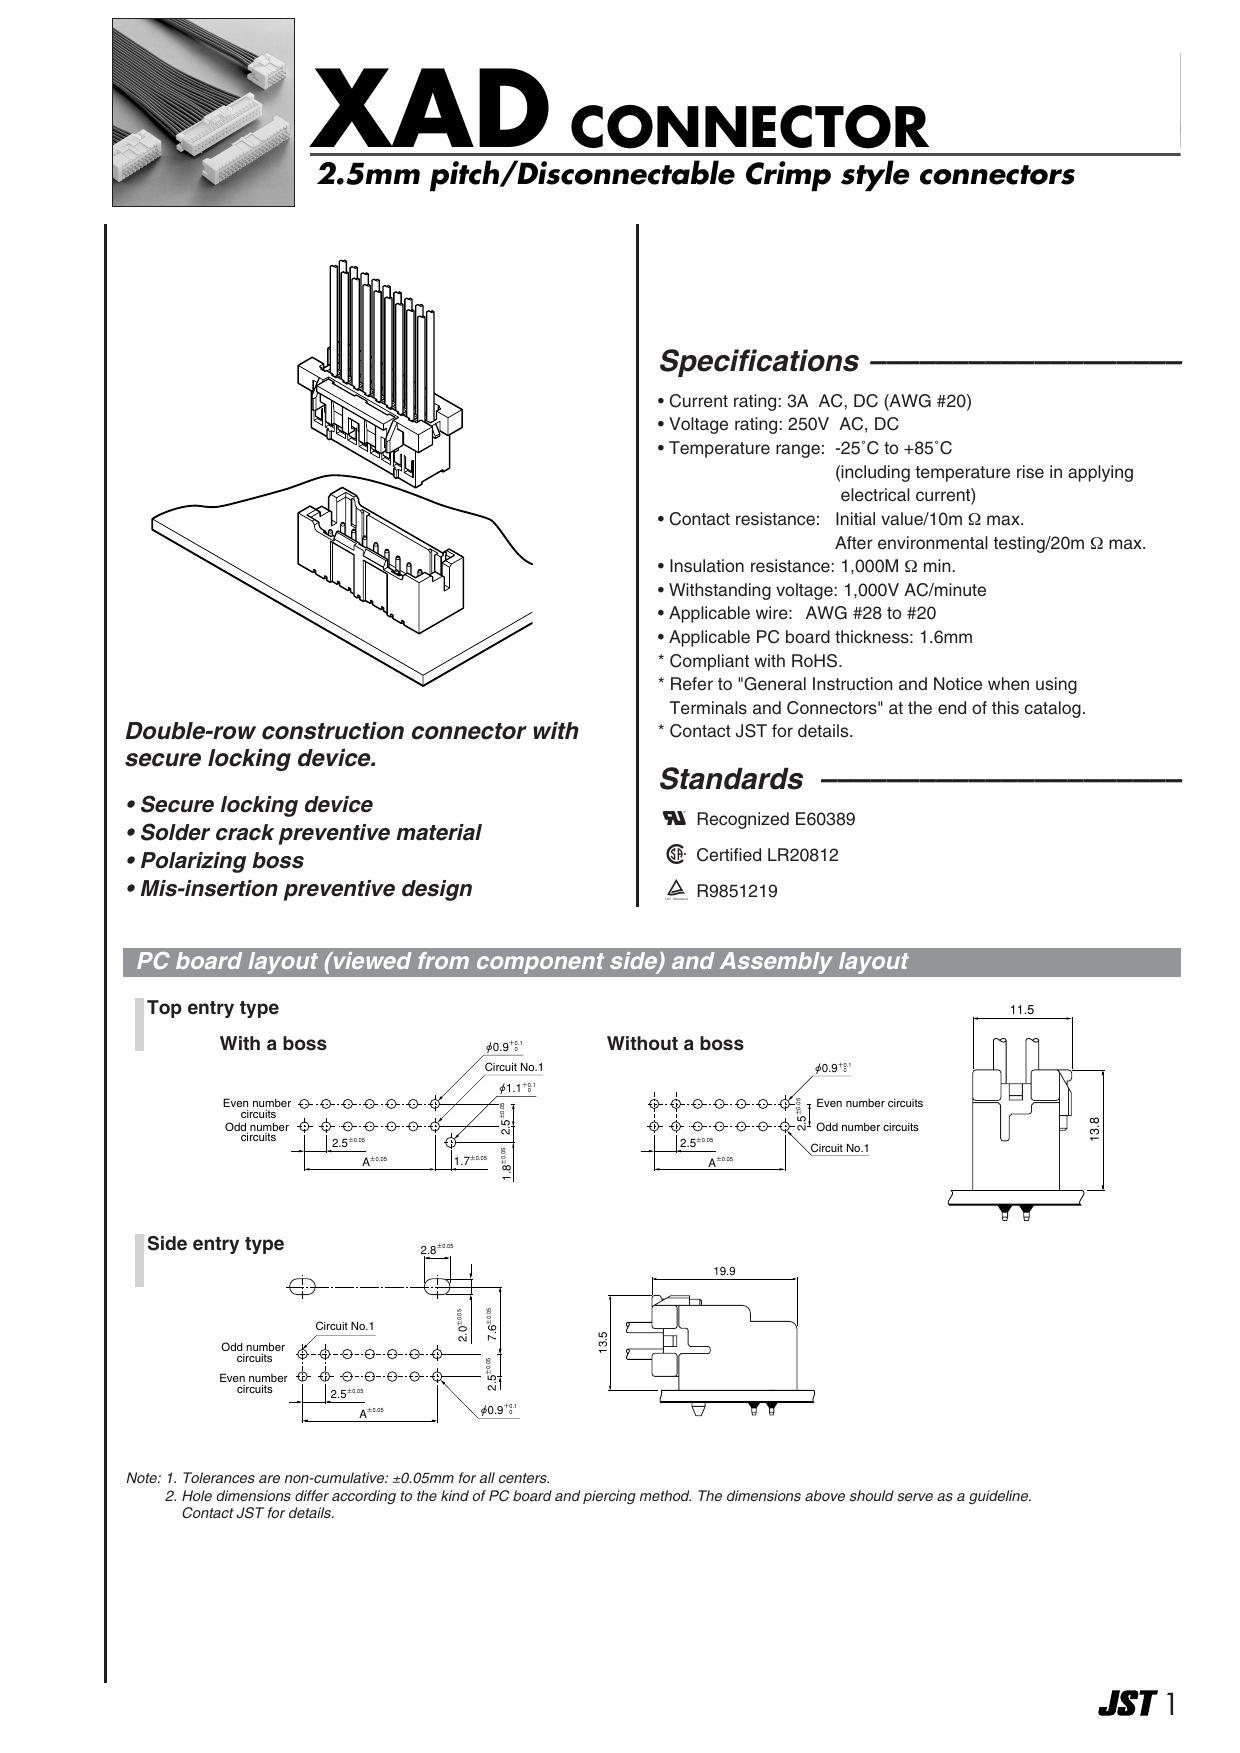 xad-connector-25mm-pitch---disconnectable-crimp-style-connectors.pdf